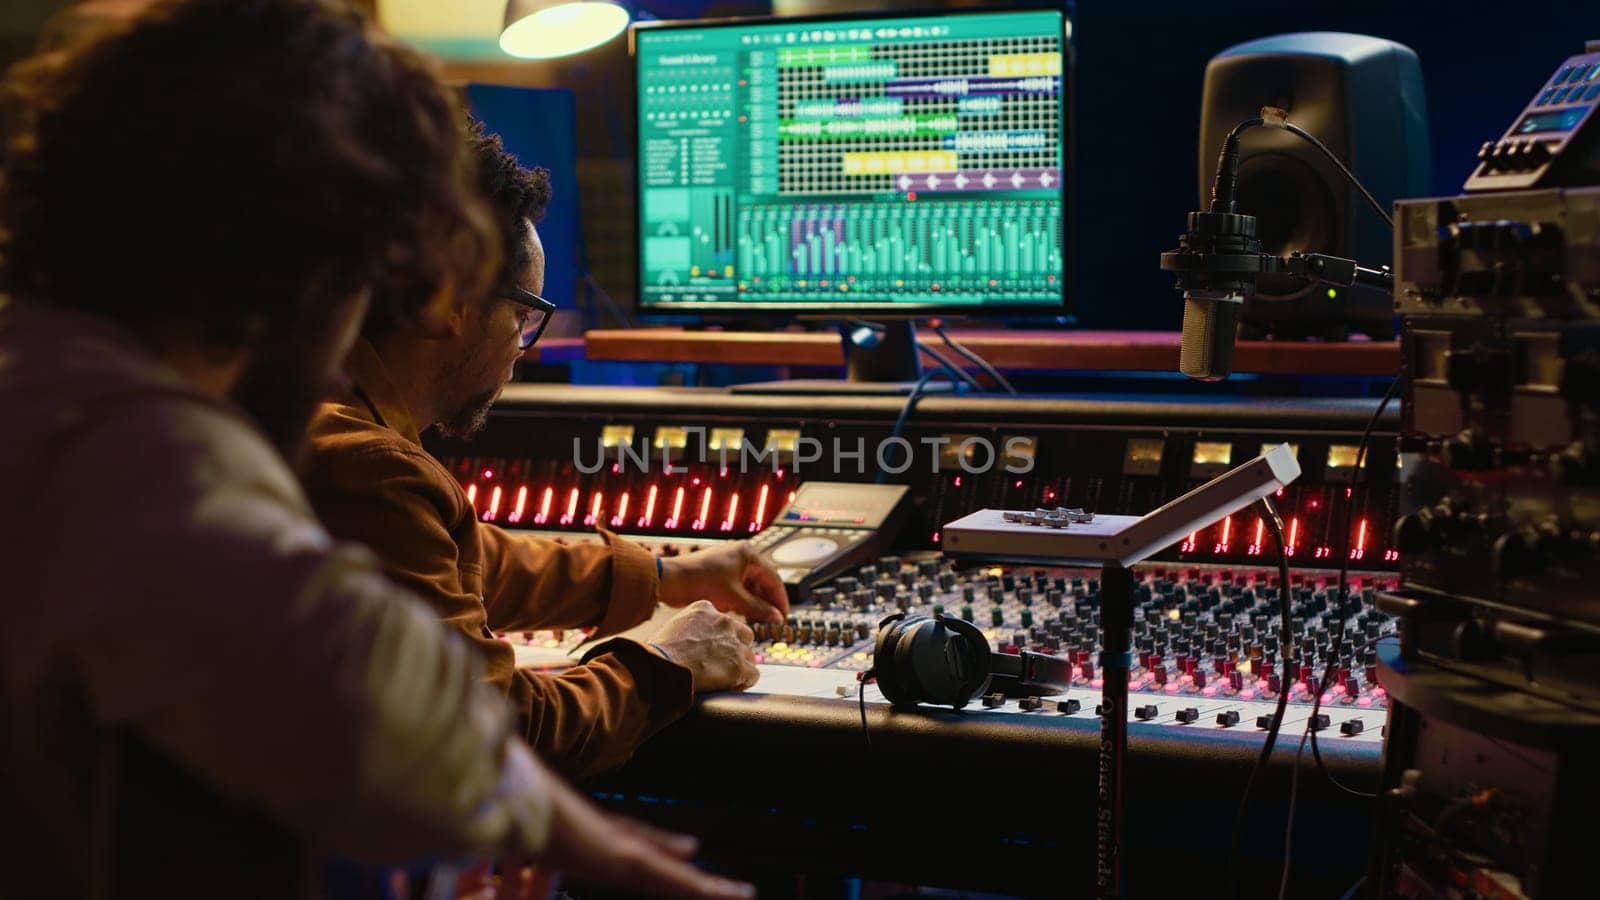 Guitarist recording his electro acoustic instrument and song in studio, producing new music with a sound engineer in control room. Skilled musician songwriter recording tracks. Camera A.